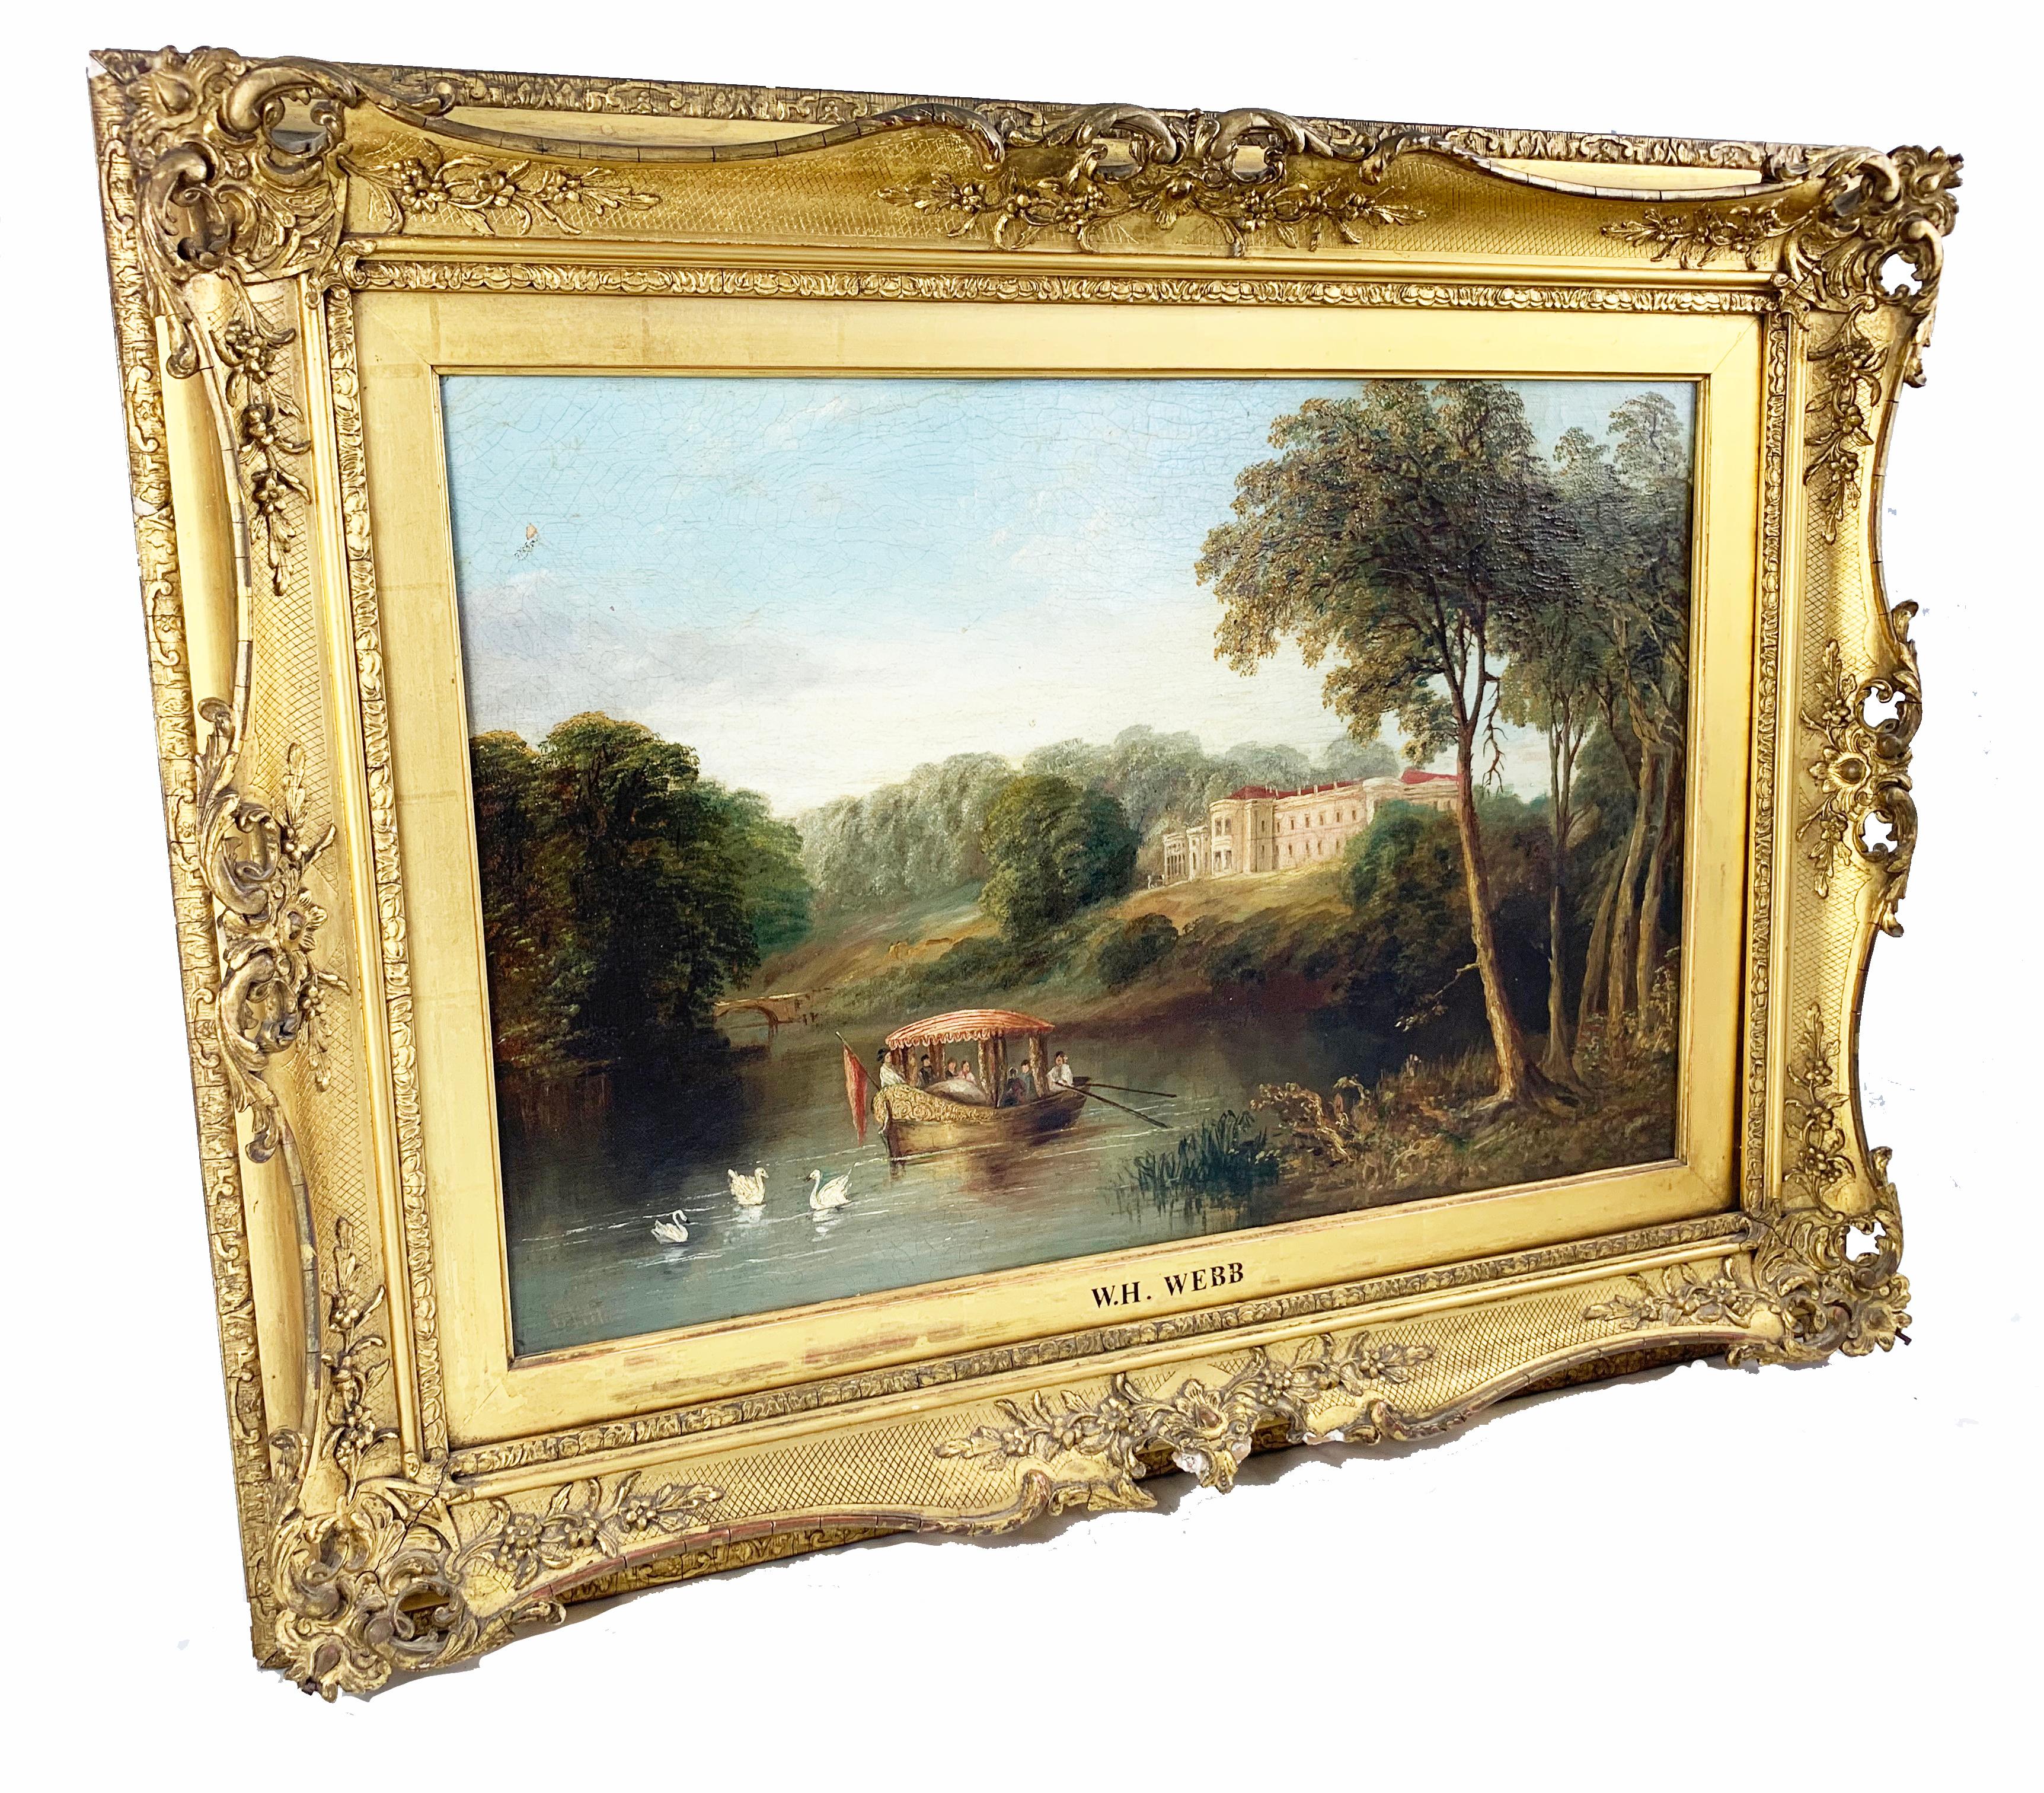 Hand-Painted 19th Century William Webb Oil Painting on Canvas Landscape